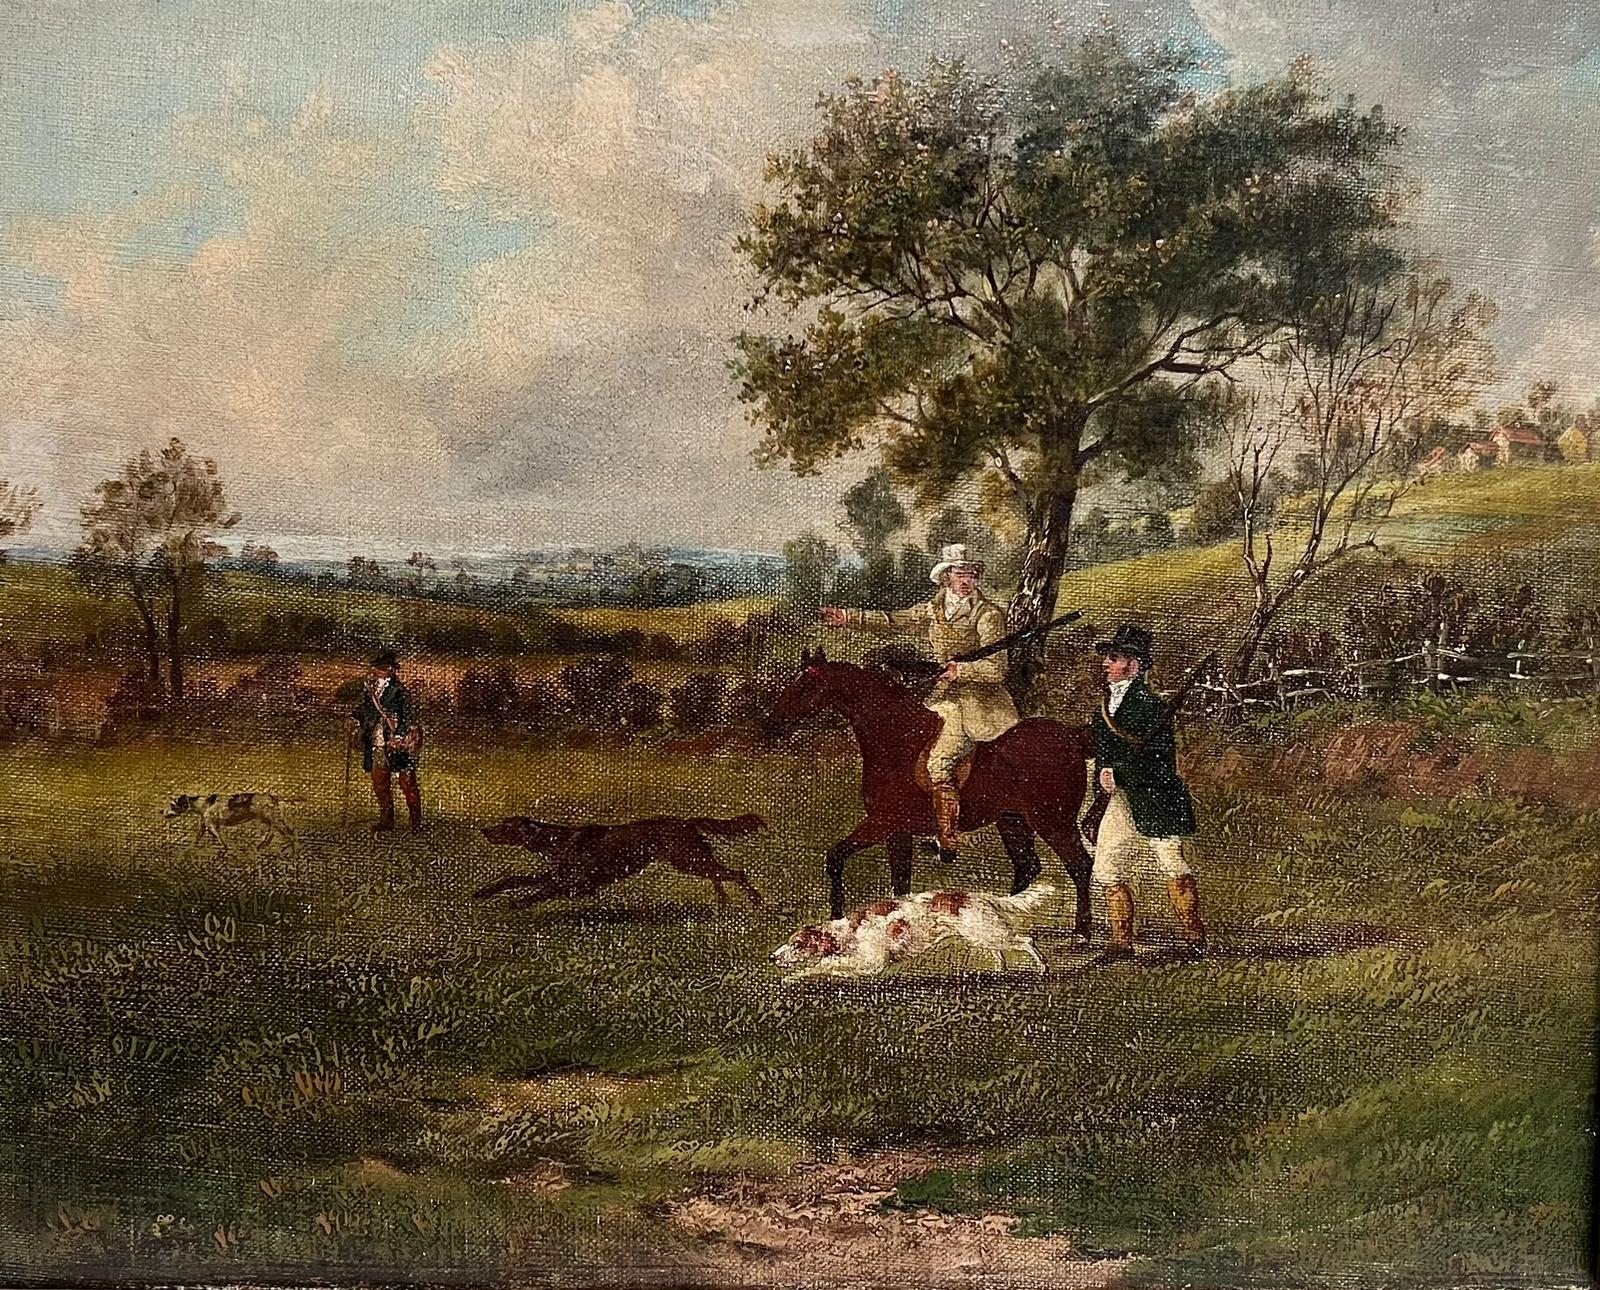 Attributed to Dean Wolstenholme Snr (1757-1837) Animal Painting - Early 19th Century British Oil Painting Country Gentleman Shooting in Landscape